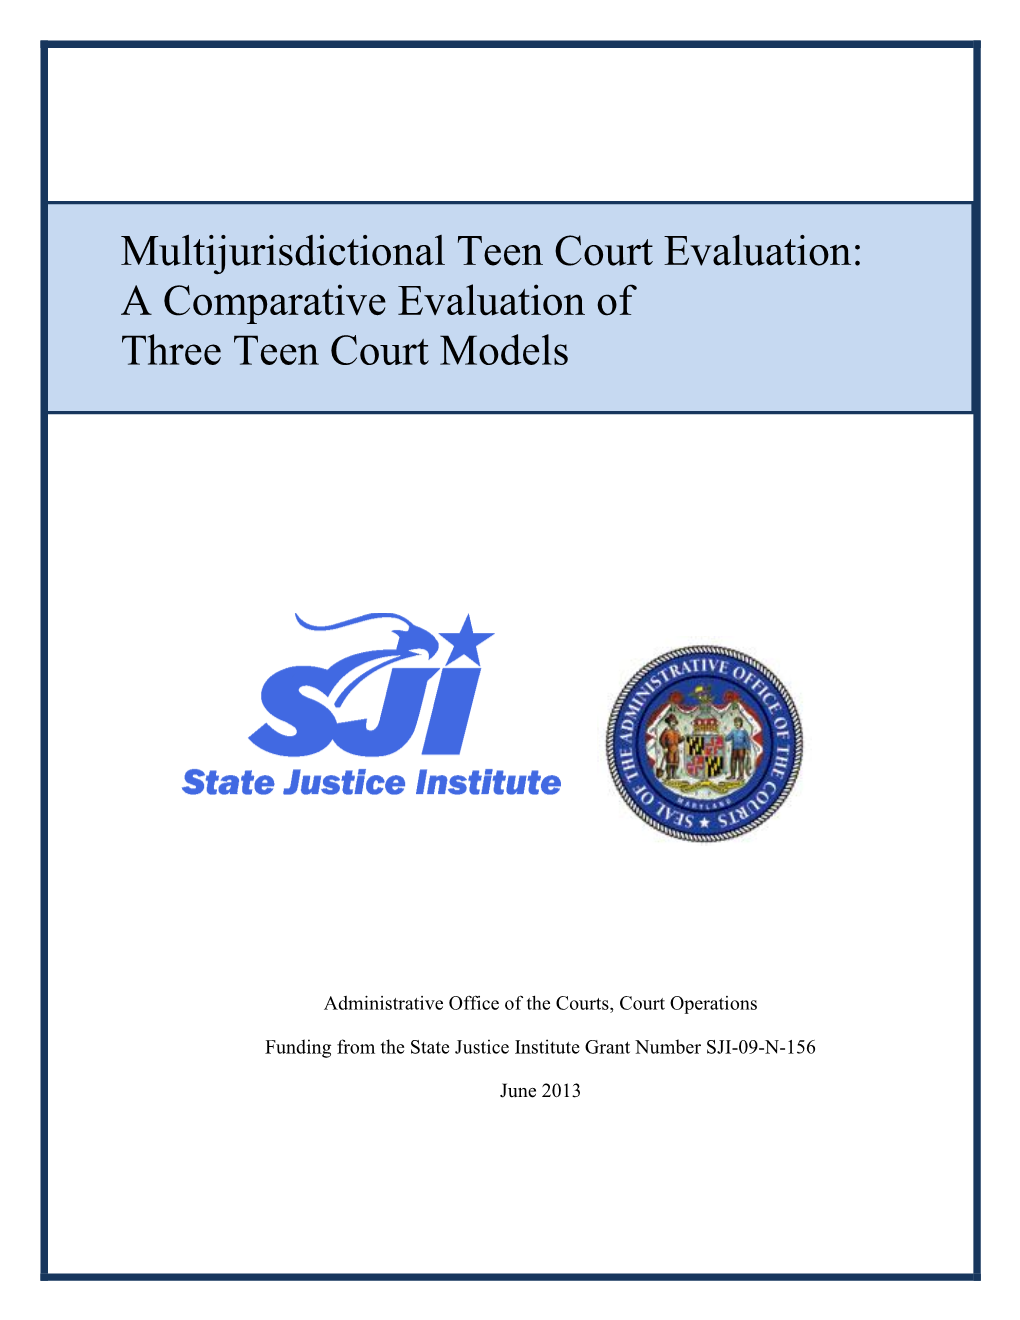 A Comparative Evaluation of Three Teen Court Models